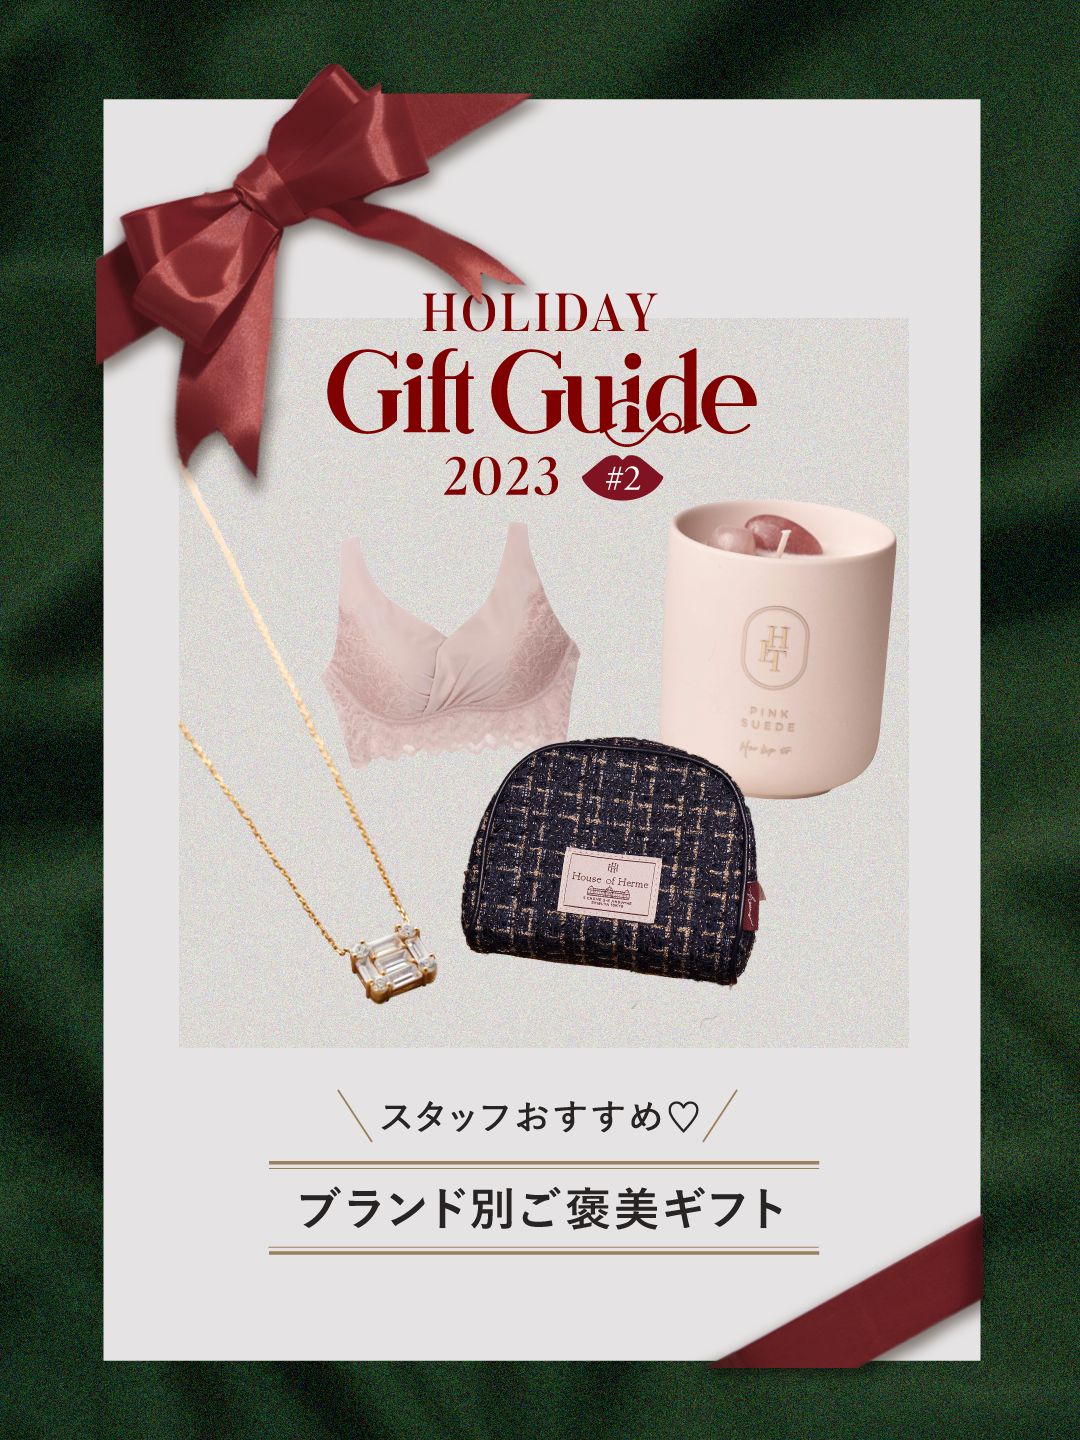 HOLIDAY GIFT GUIDE 2023 #2